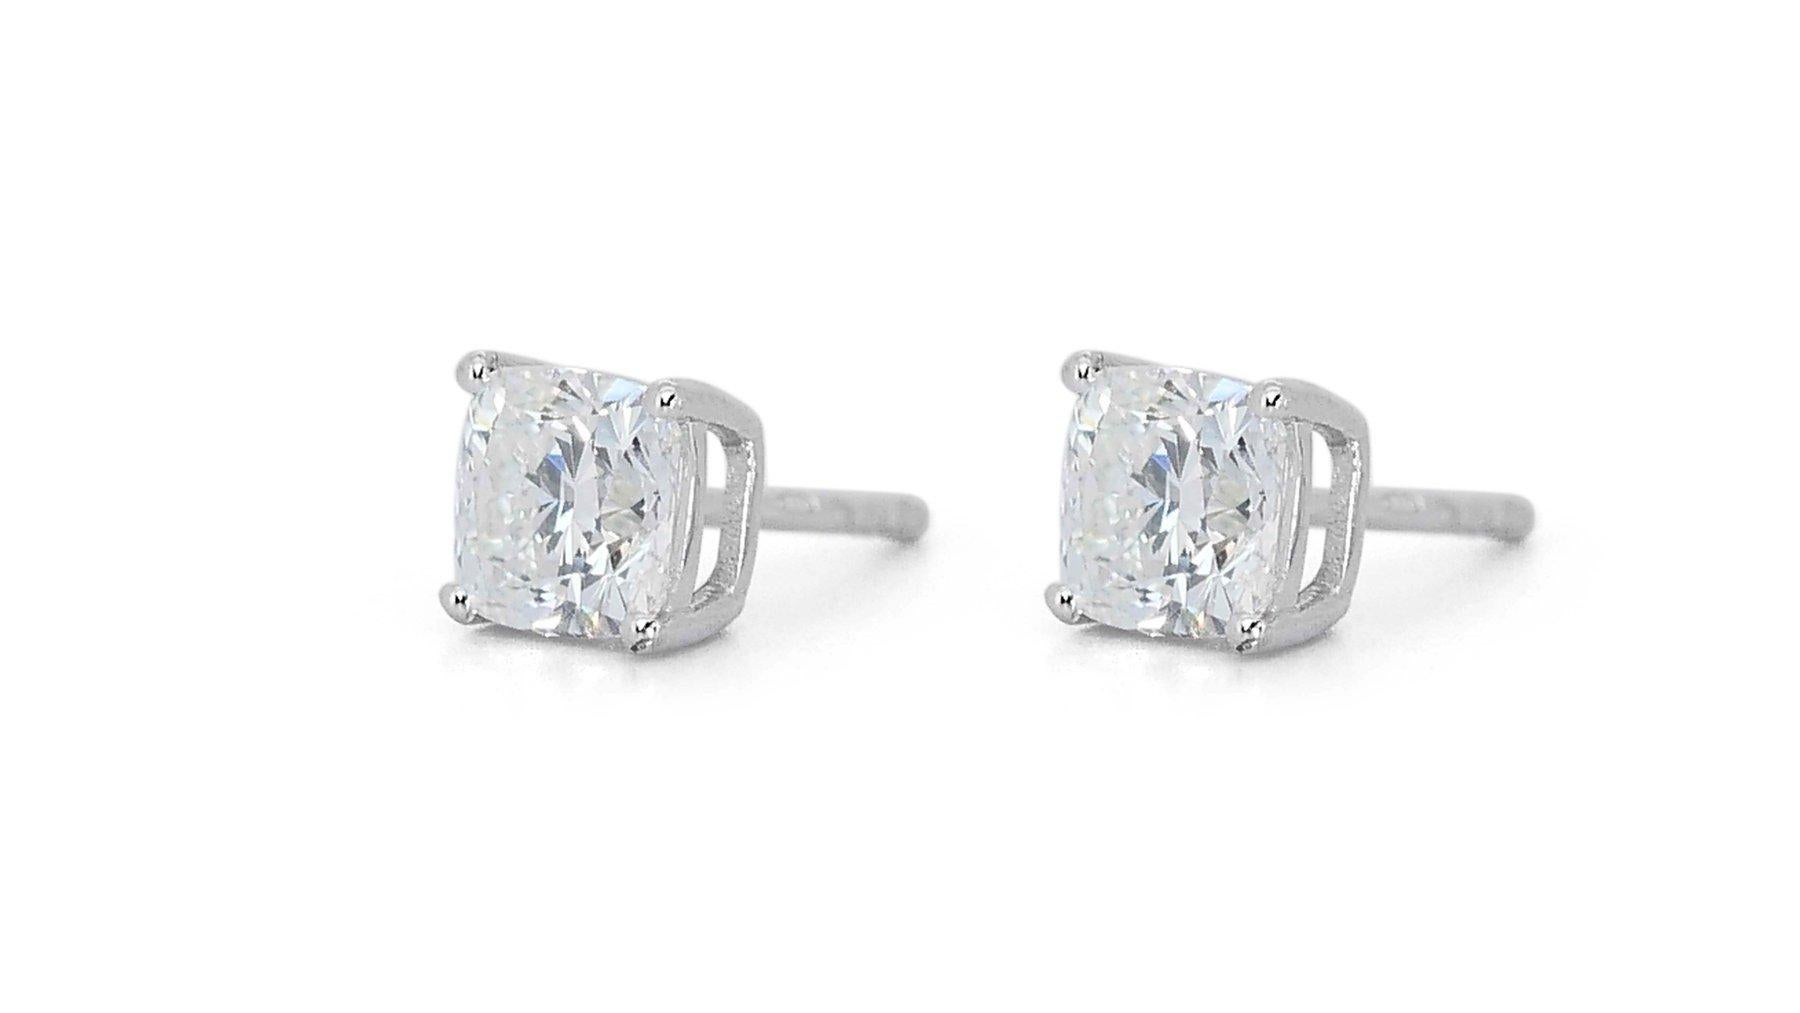 Dazzling Pair of 18K White Gold Earrings with 2.06 Carat Square Diamond For Sale 1